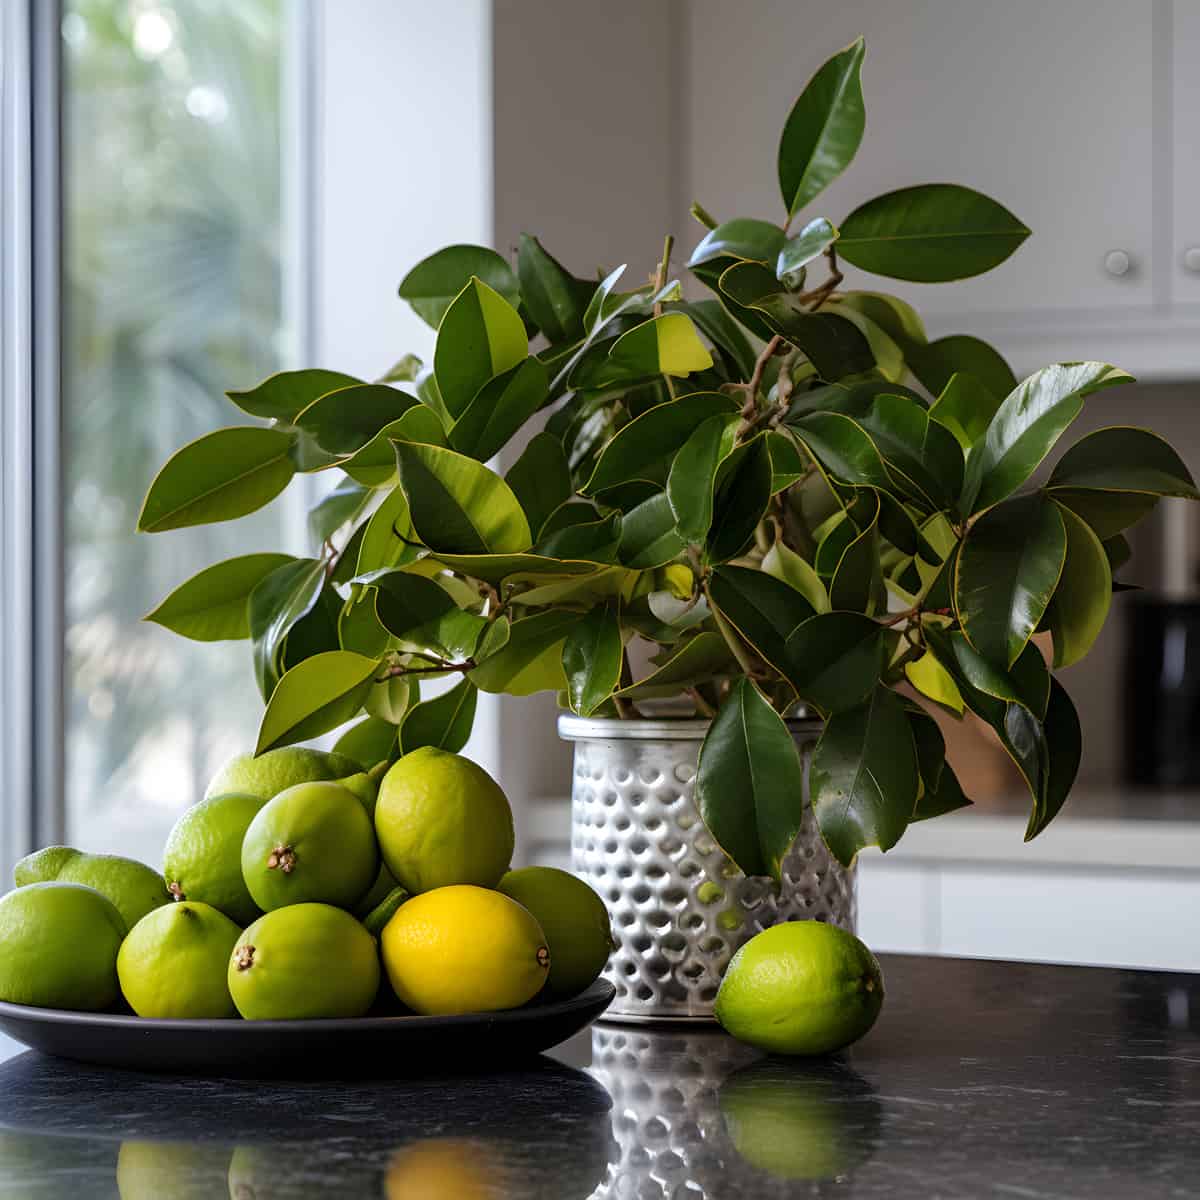 Ficus Neriifolia Fruit on a kitchen counter